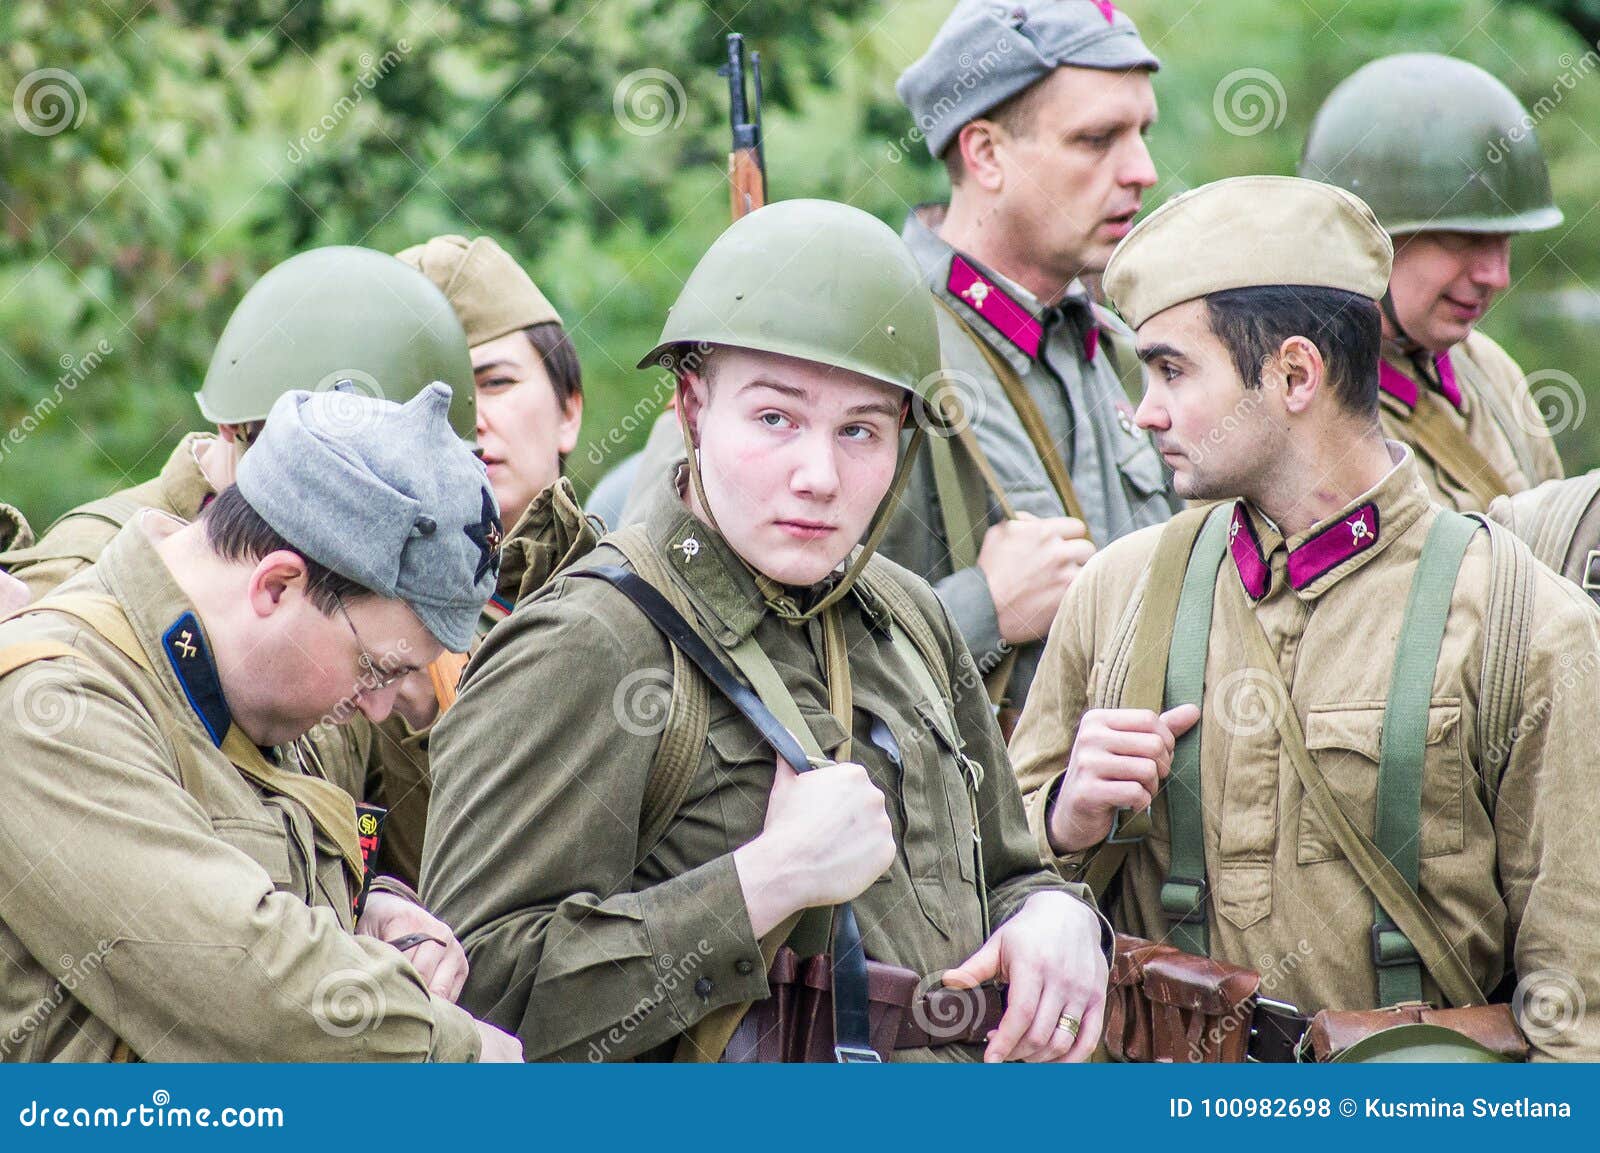 Reconstruction of Battle of 1941 World War 2 between Nazi Troops and ...